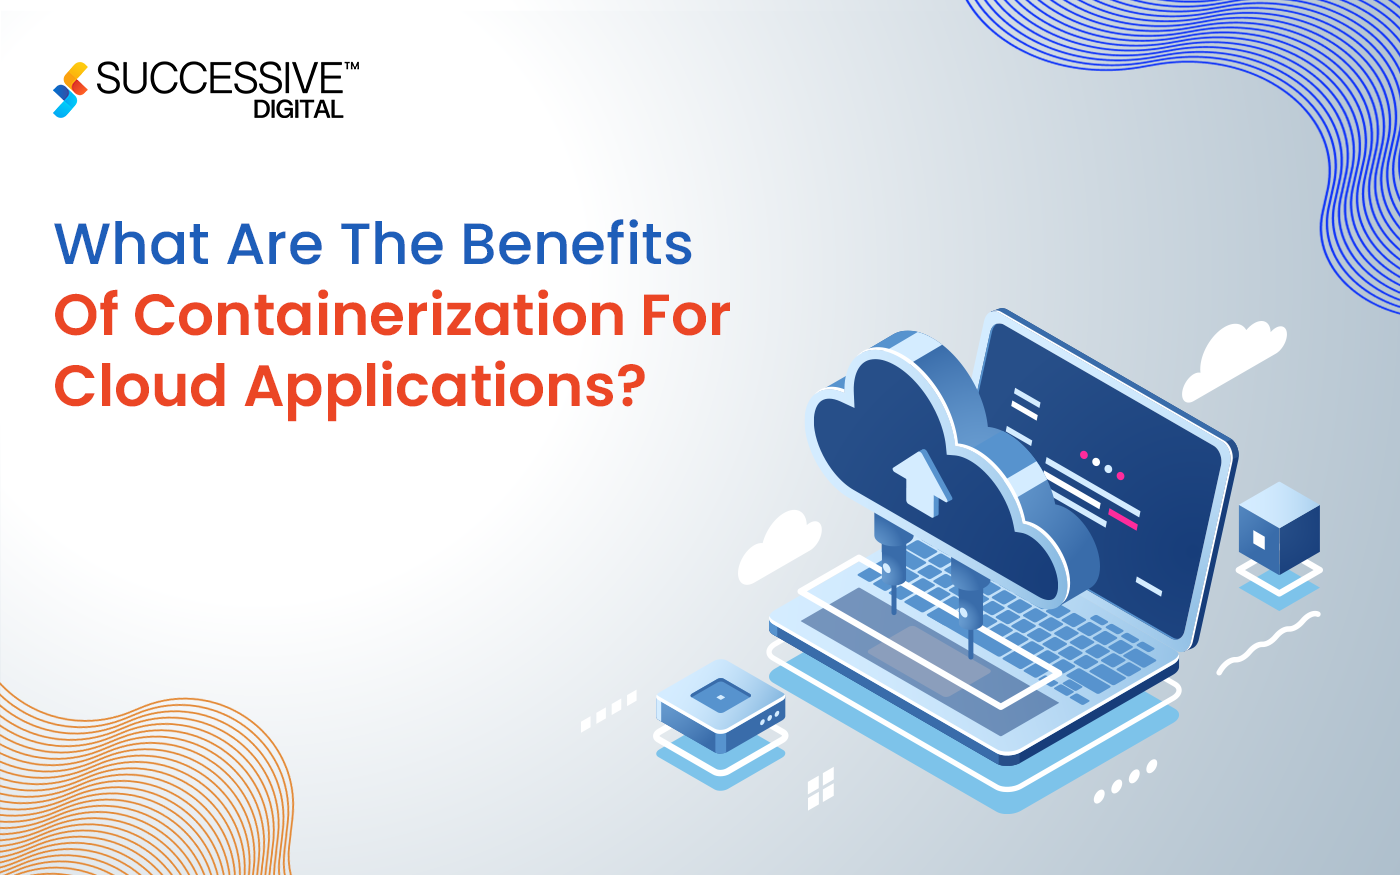 What Are The Benefits Of Containerization For Cloud Applications?